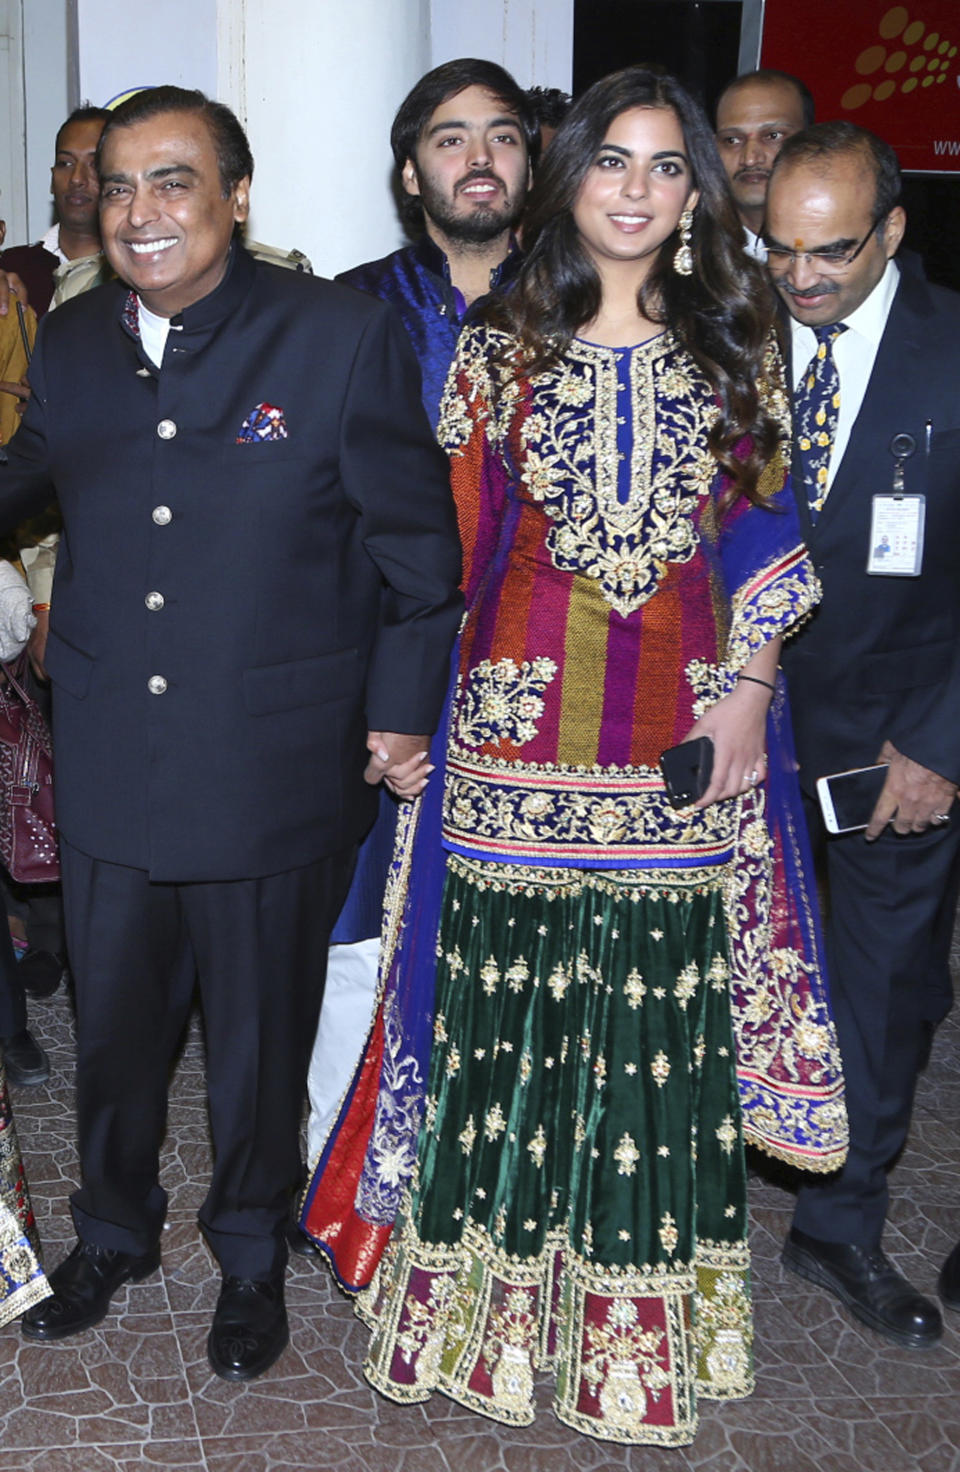 FILE - In this Friday, Nov. 30, 2018 file photo, Chairman of Reliance Industries Mukesh Ambani, left, and his daughter Isha Ambani, arrive to attend the wedding of Bollywood actress Priyanka Chopra and Nick Jonas in Jodhpur, India. Isha, the daughter of India’s richest mogul, is to wed Anand Piramal, the son of one of India’s biggest industrialists, at the Ambani estate in Mumbai on Wednesday, Dec. 12, capping off an extravagant days-long event. (AP Photo/Sunil Verma, File)